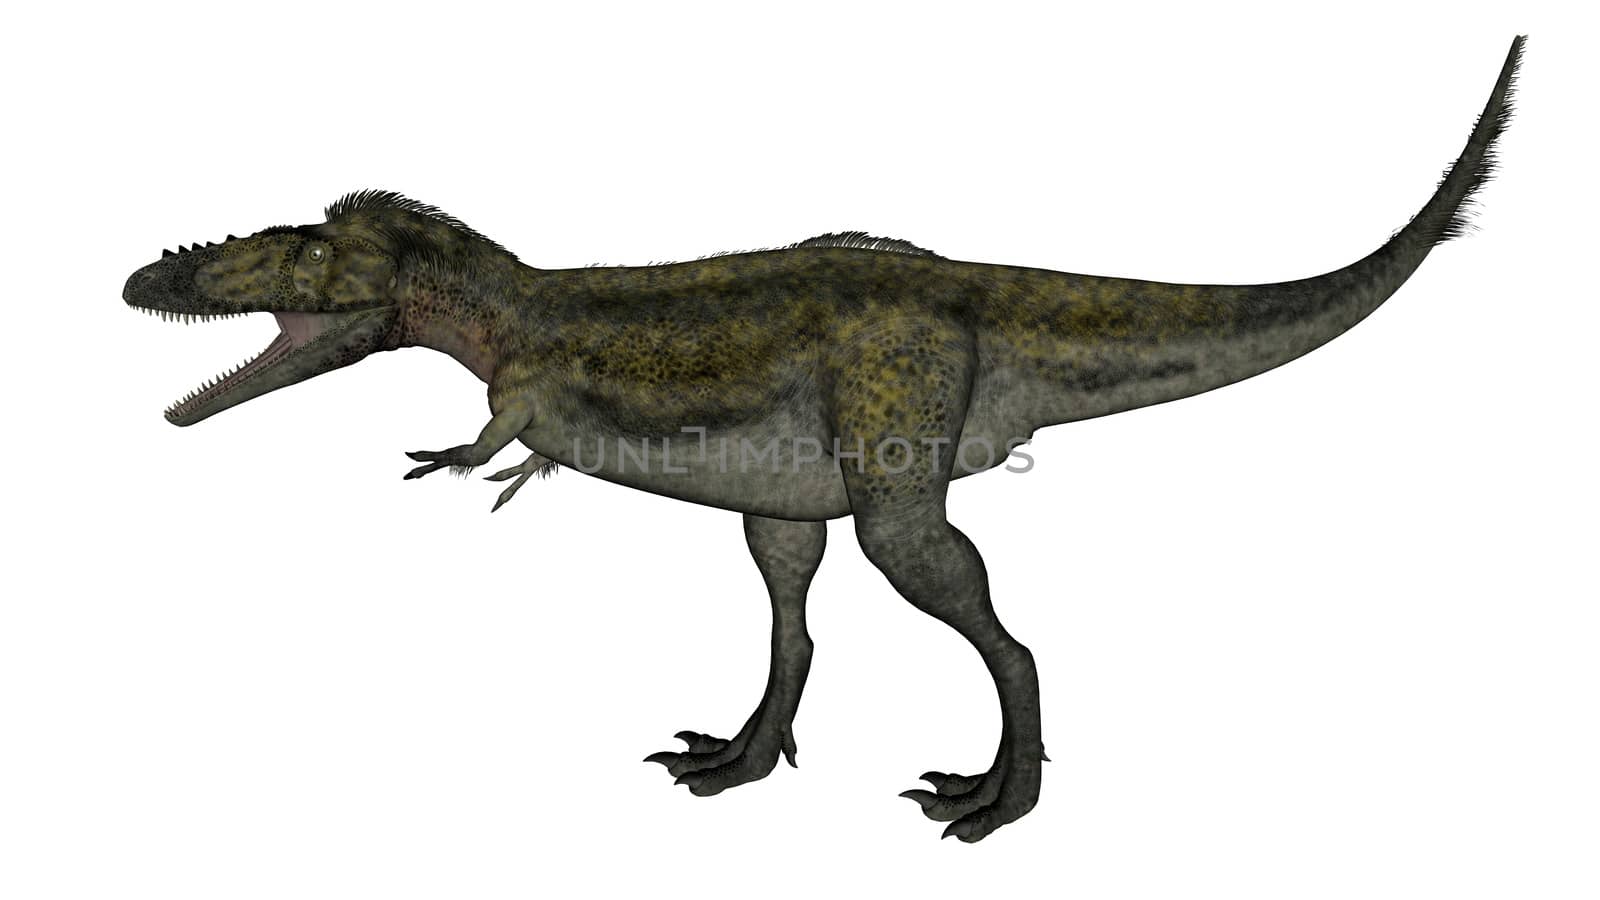 Alioramus dinosaur walking and roaring isolated in white background - 3D render